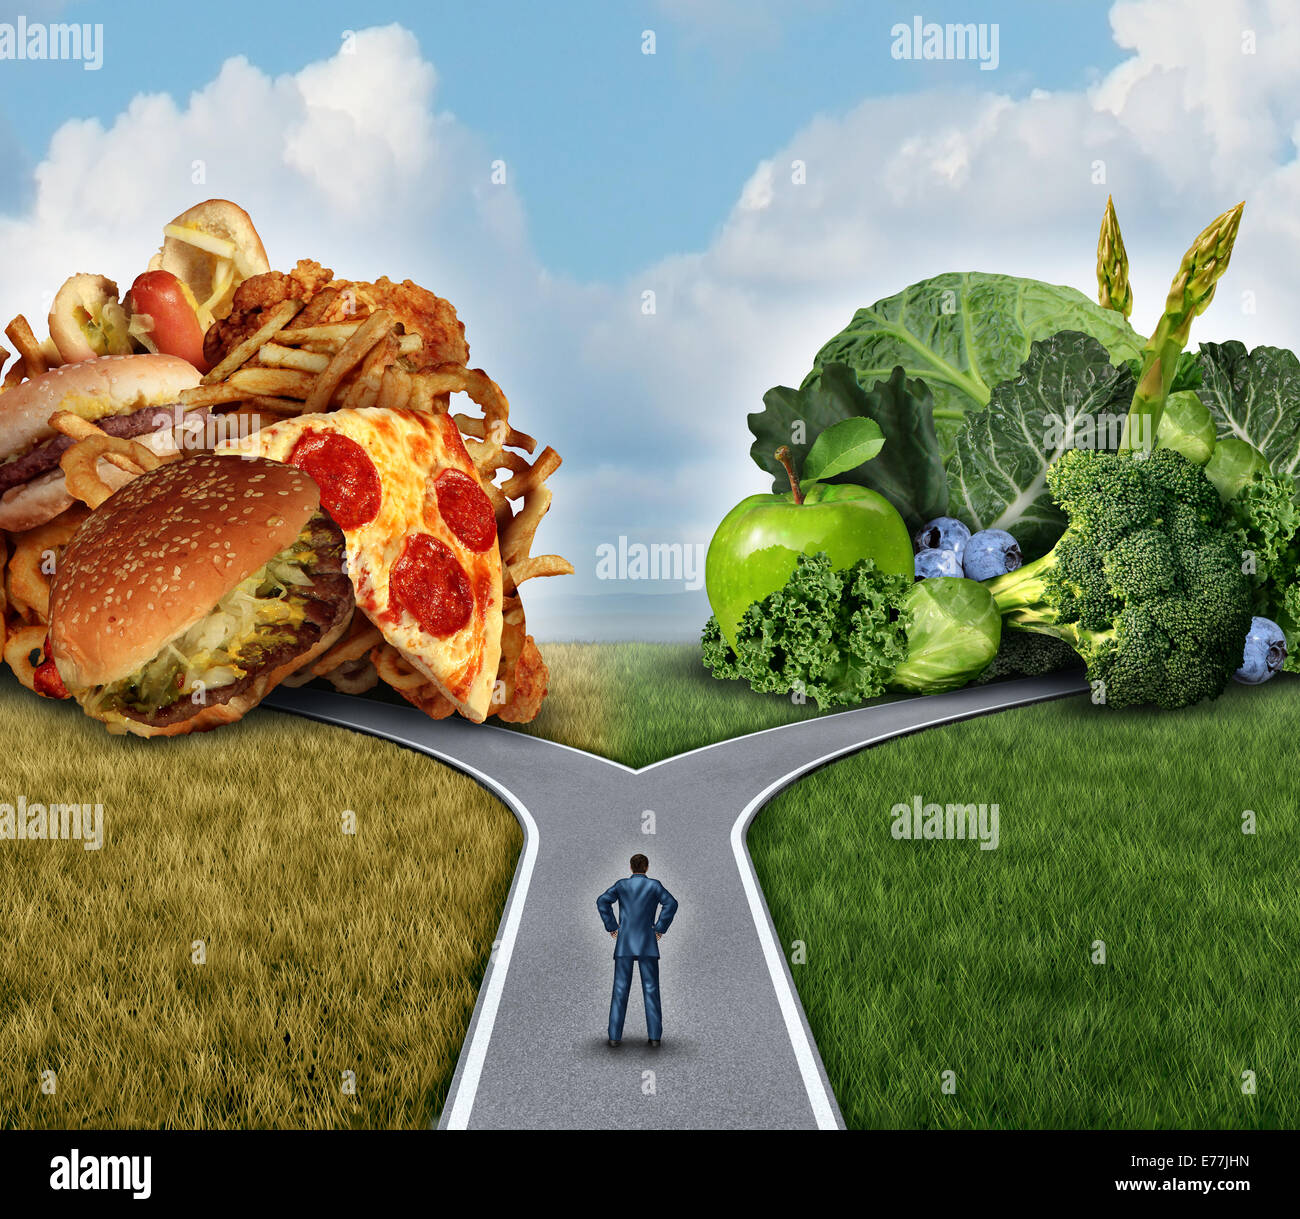 Diet decision concept and nutrition choices dilemma between healthy good fresh fruit and vegetables or greasy cholesterol rich fast food with a man on a crossroad trying to decide what to eat for the best lifestyle choice. Stock Photo